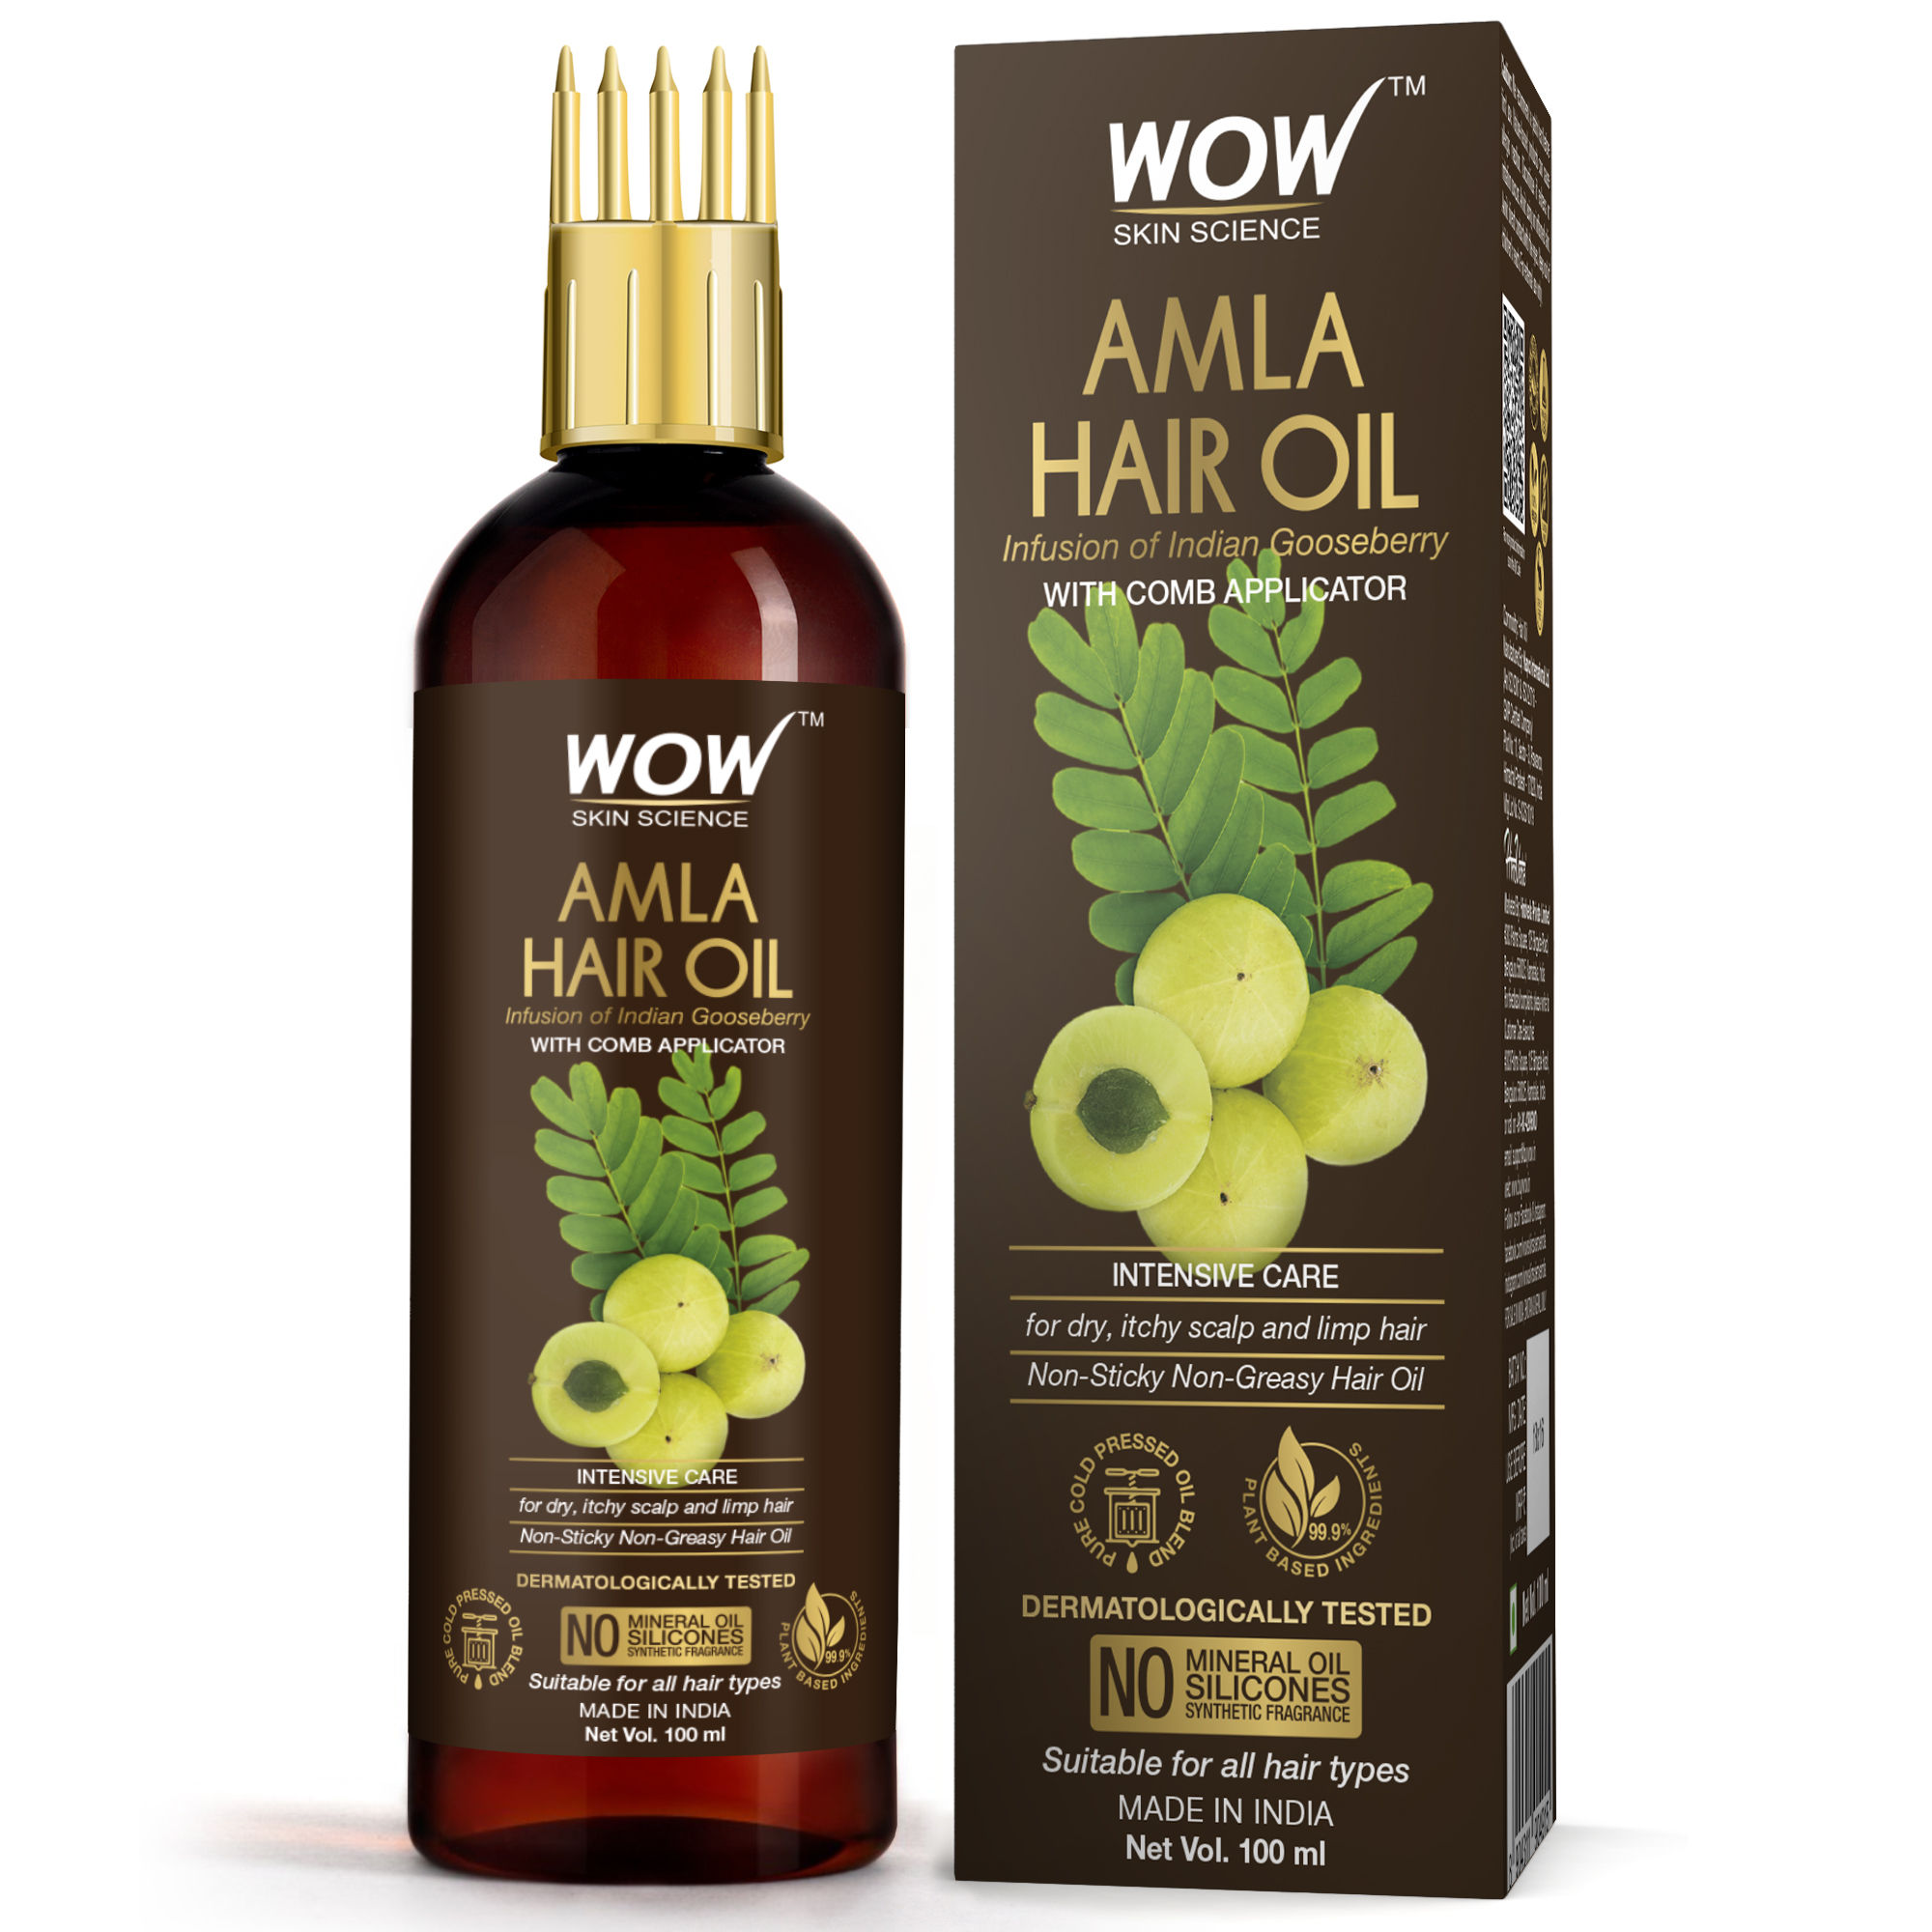 Wow Skin Science Amla Hair Oil with Comb Applicator